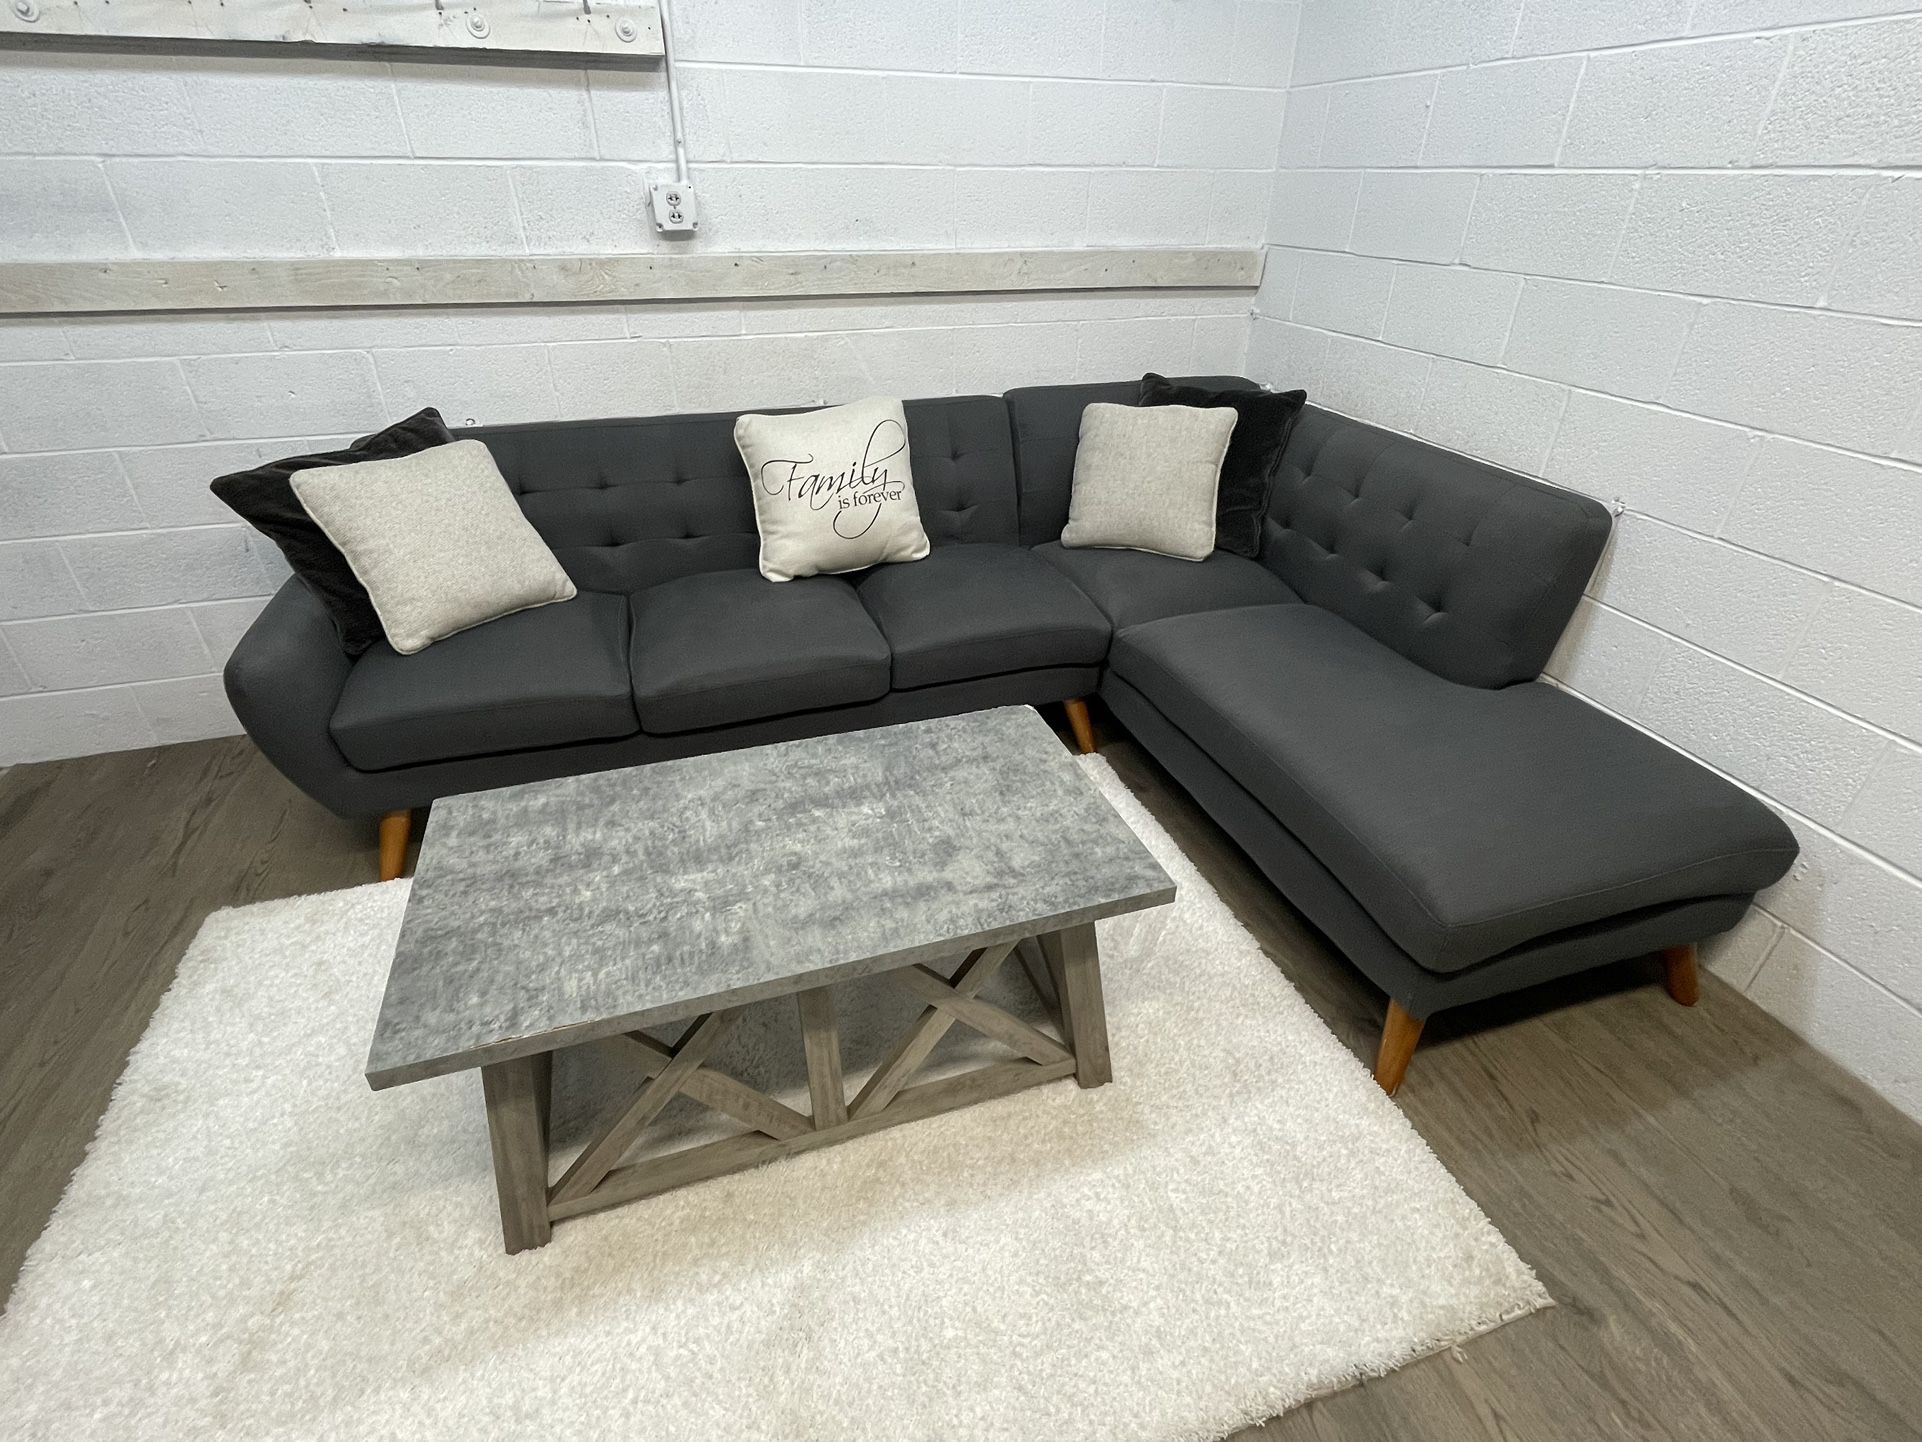 $650 OBO Dark Grey Mid Century Modern L Sectional In GREAT Condition! FREE DELIVERY!🚚🛋️🔥